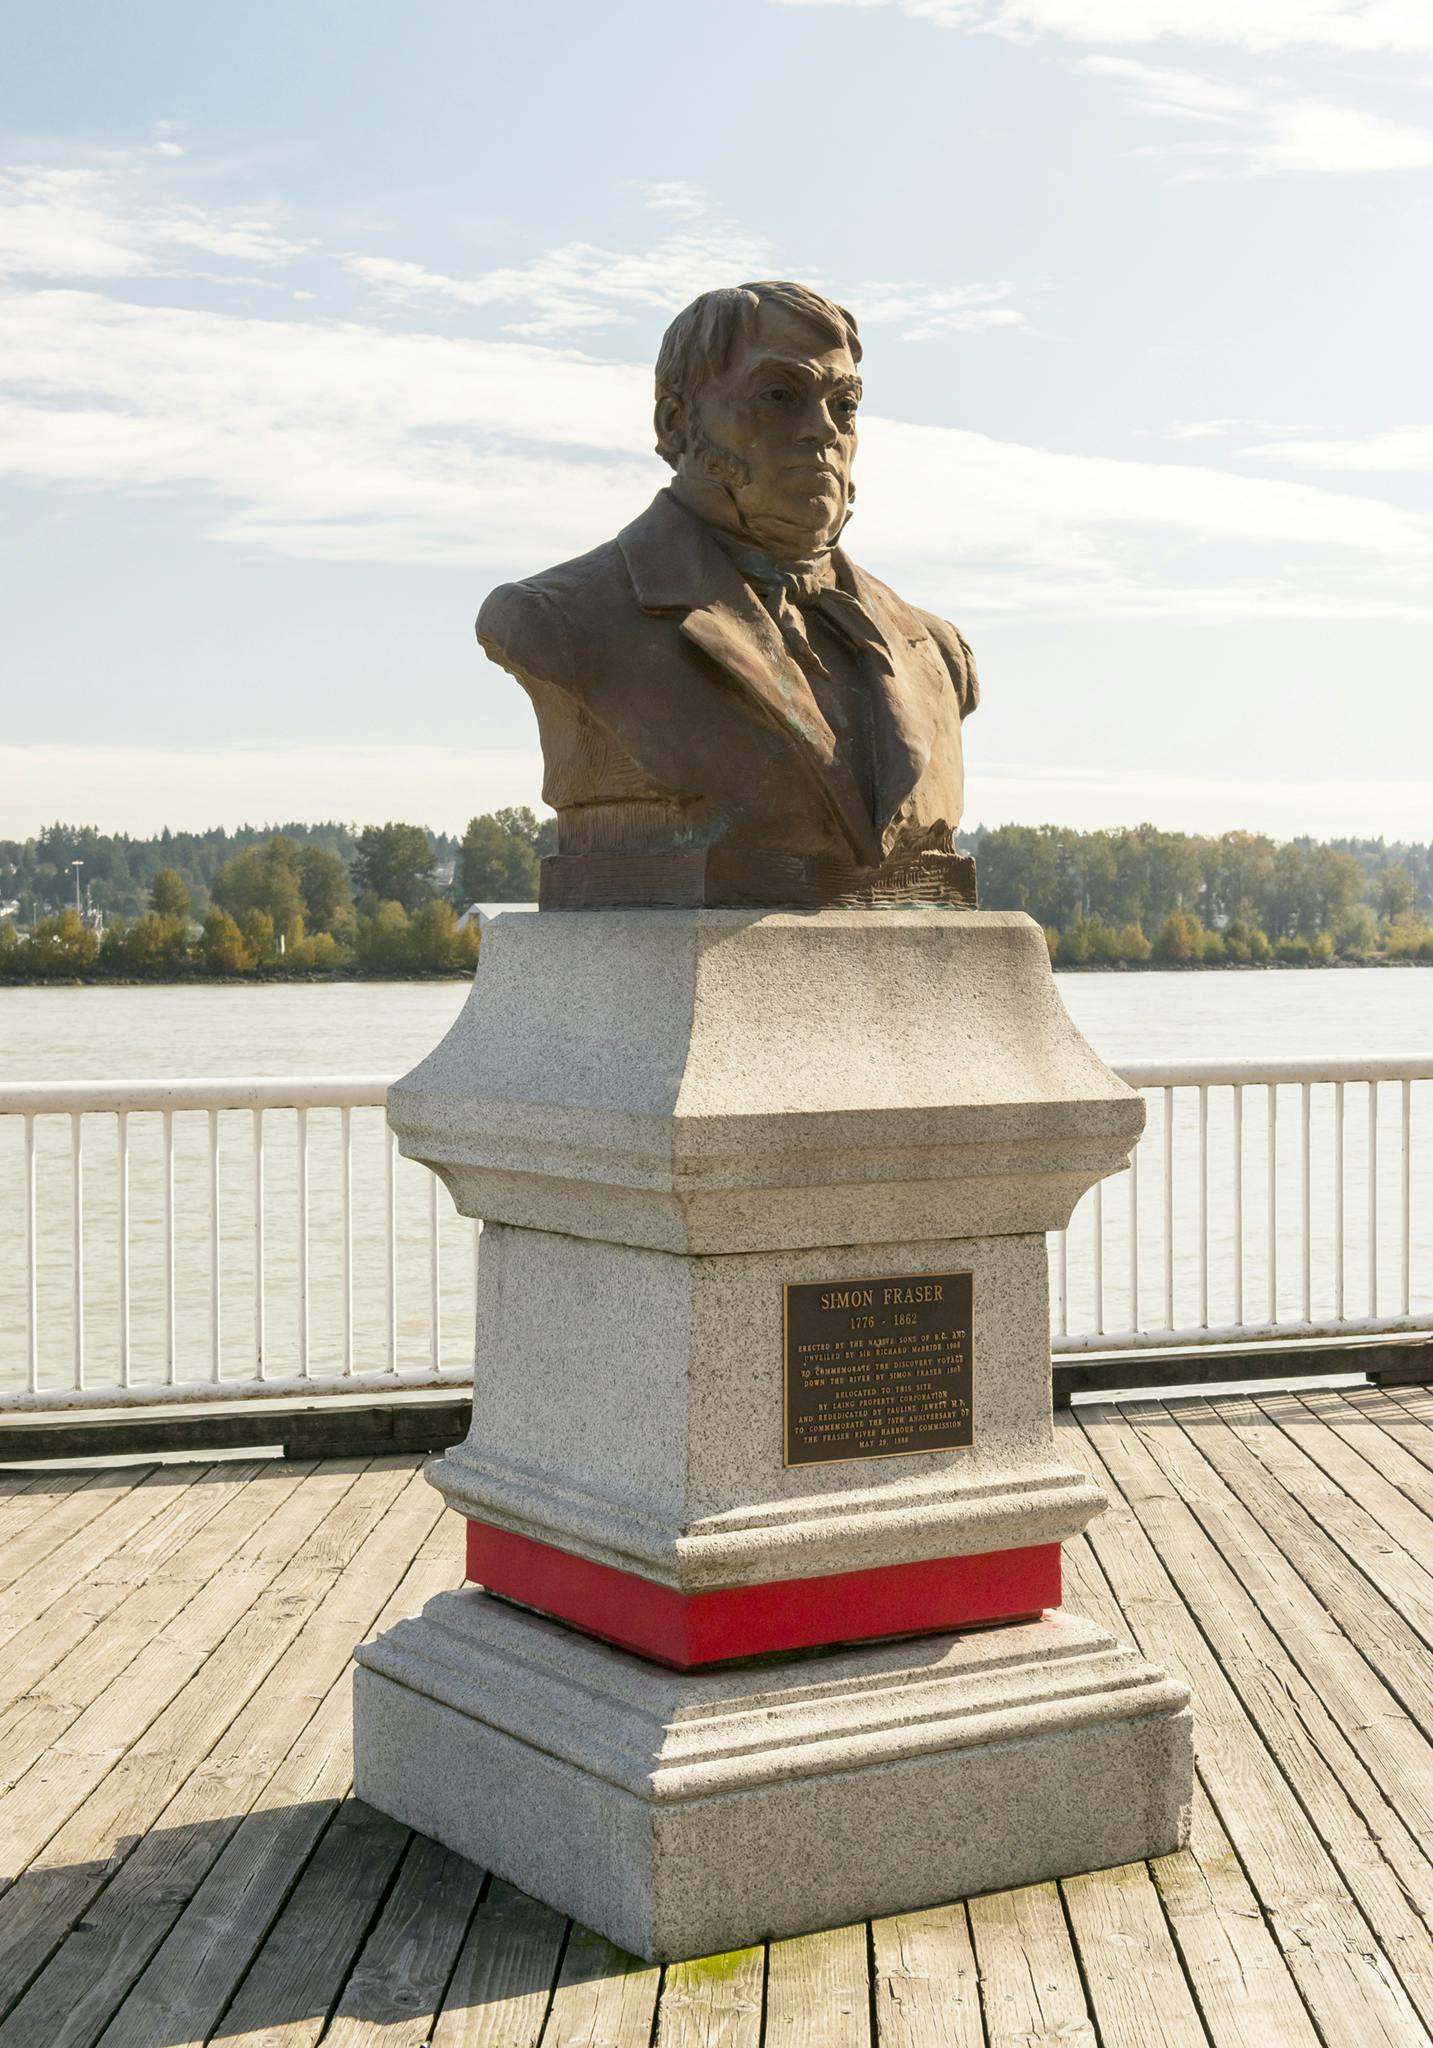 An image of a monument to Simon Fraser installed on a wooden pier by water. The monument is a bronze bust of Fraser atop a granite plinth.